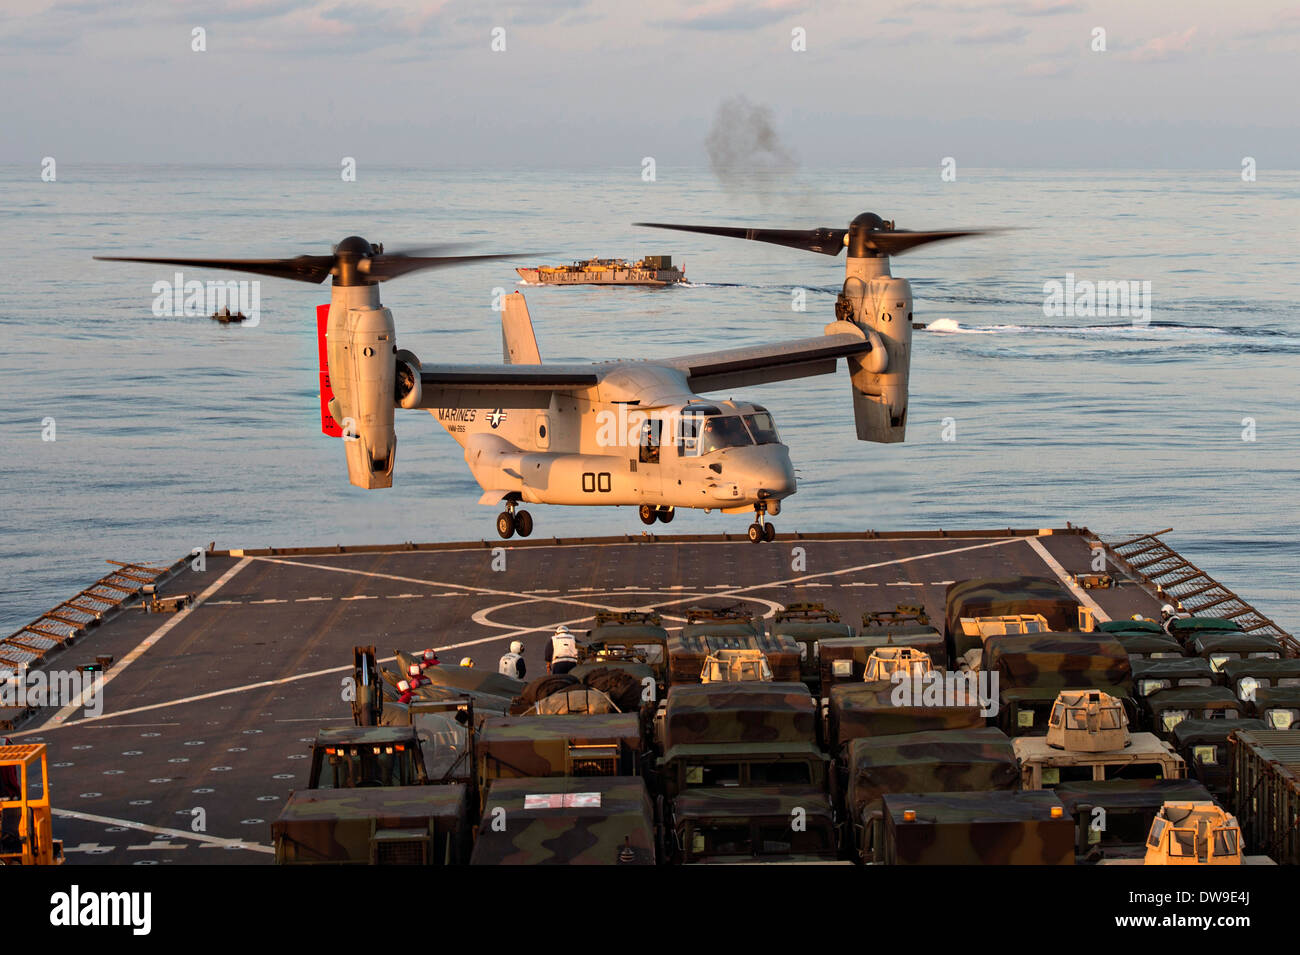 A US Marines V-22 Osprey transport aircraft takes off from the flight deck of the USS Ashland during flight operations February 28, 2014 in the East China Sea. Stock Photo